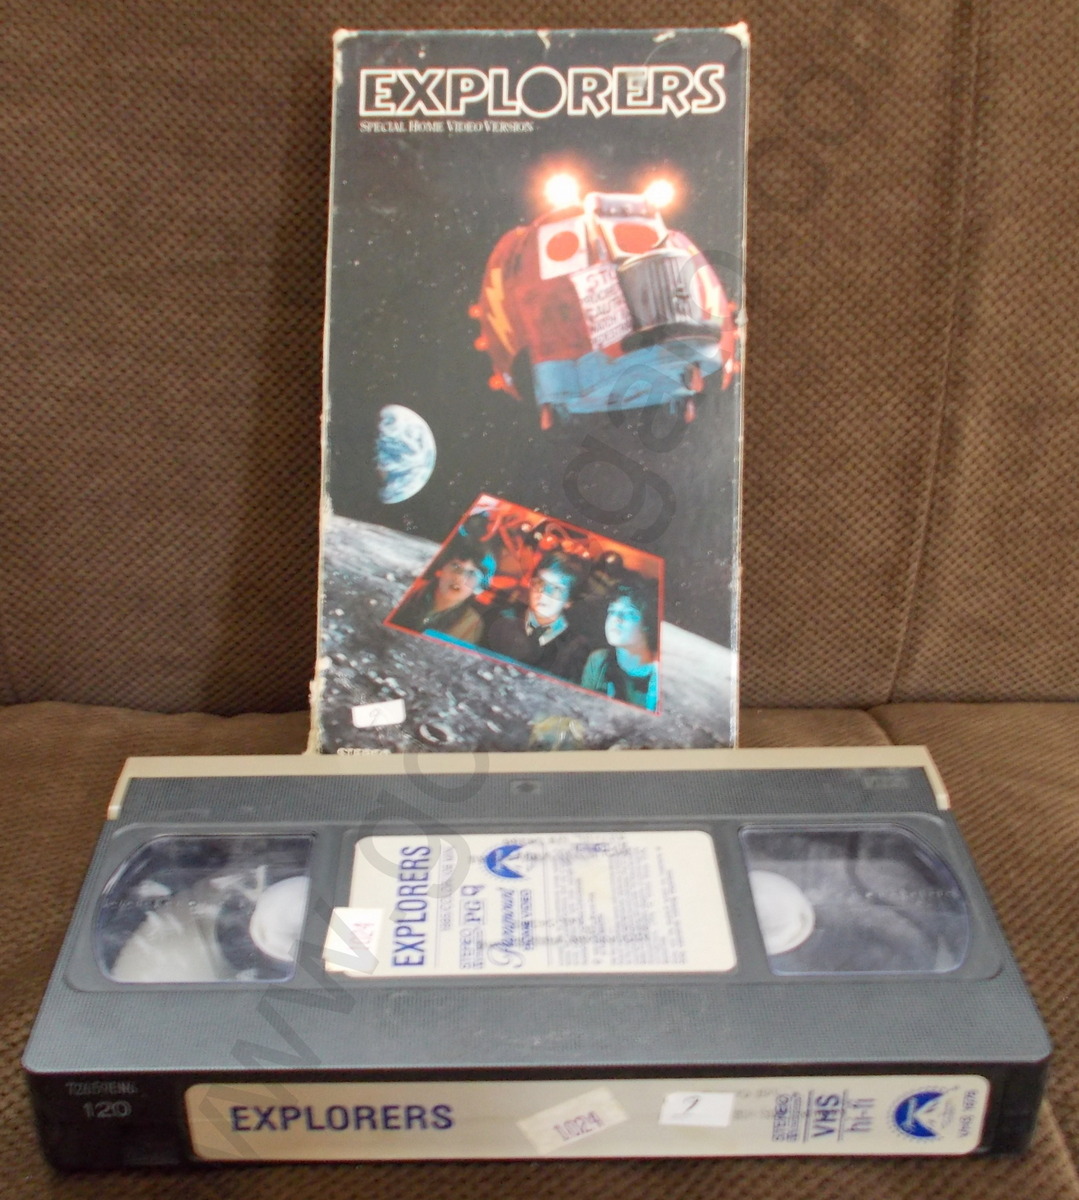 Explorers - Special Home Video Version (VHS, 1985)